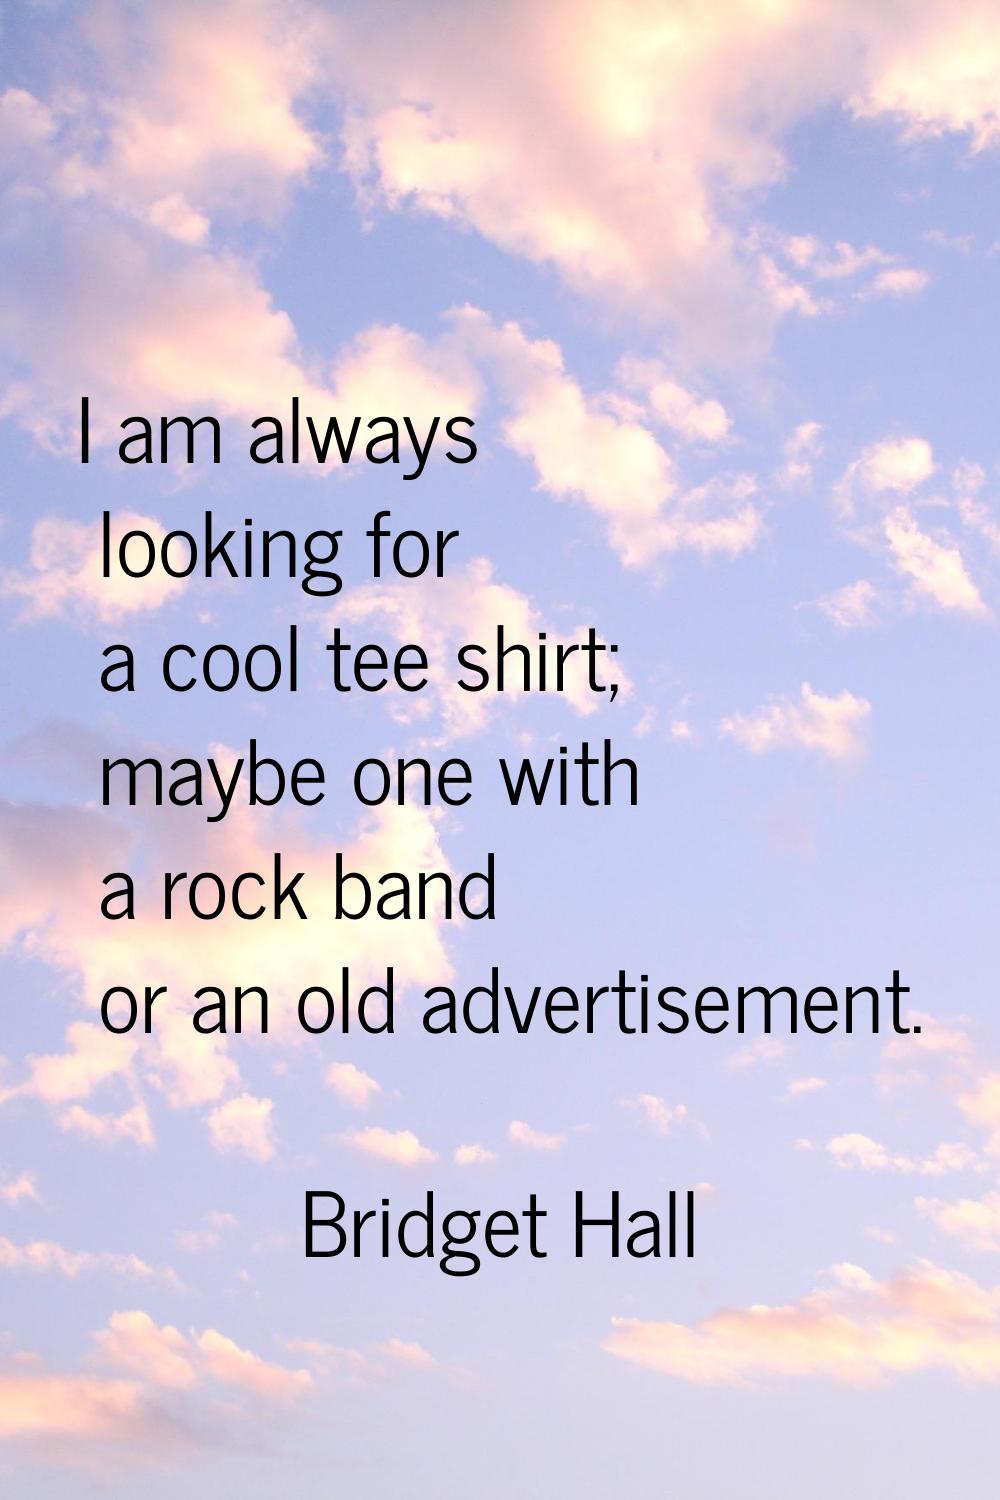 I am always looking for a cool tee shirt; maybe one with a rock band or an old advertisement.